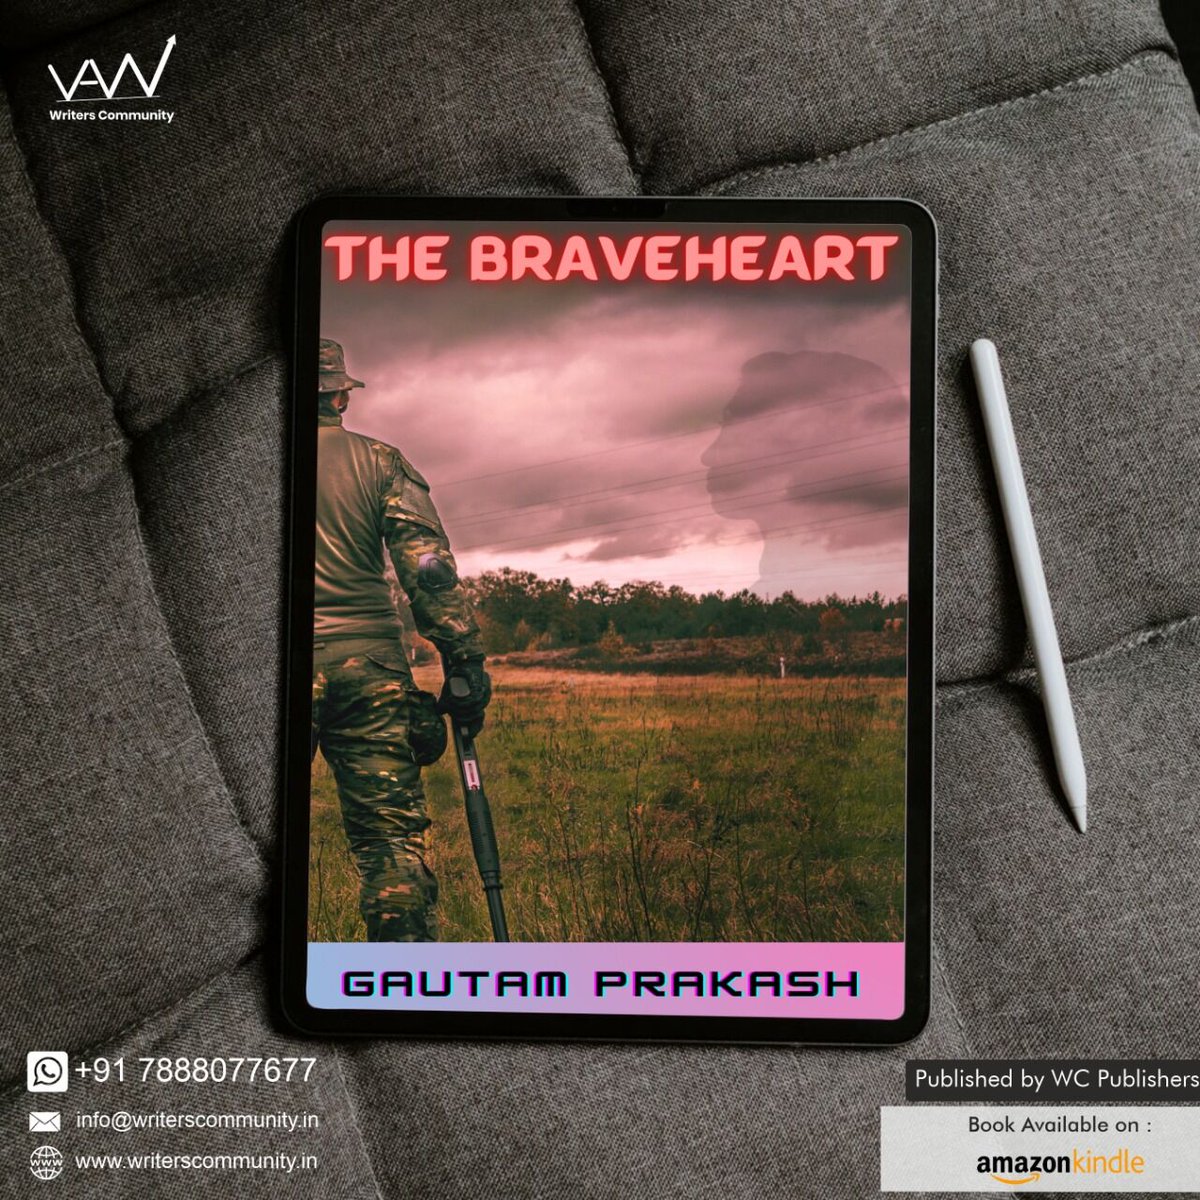 The Braveheart is an action-packed romantic novelette that is guaranteed to raise your eyebrows. Daniel is a young lad who is determined to become an army officer but faces obstacles that cannot be jumped over. He also unexpectedly meets his love from the past which seals his des